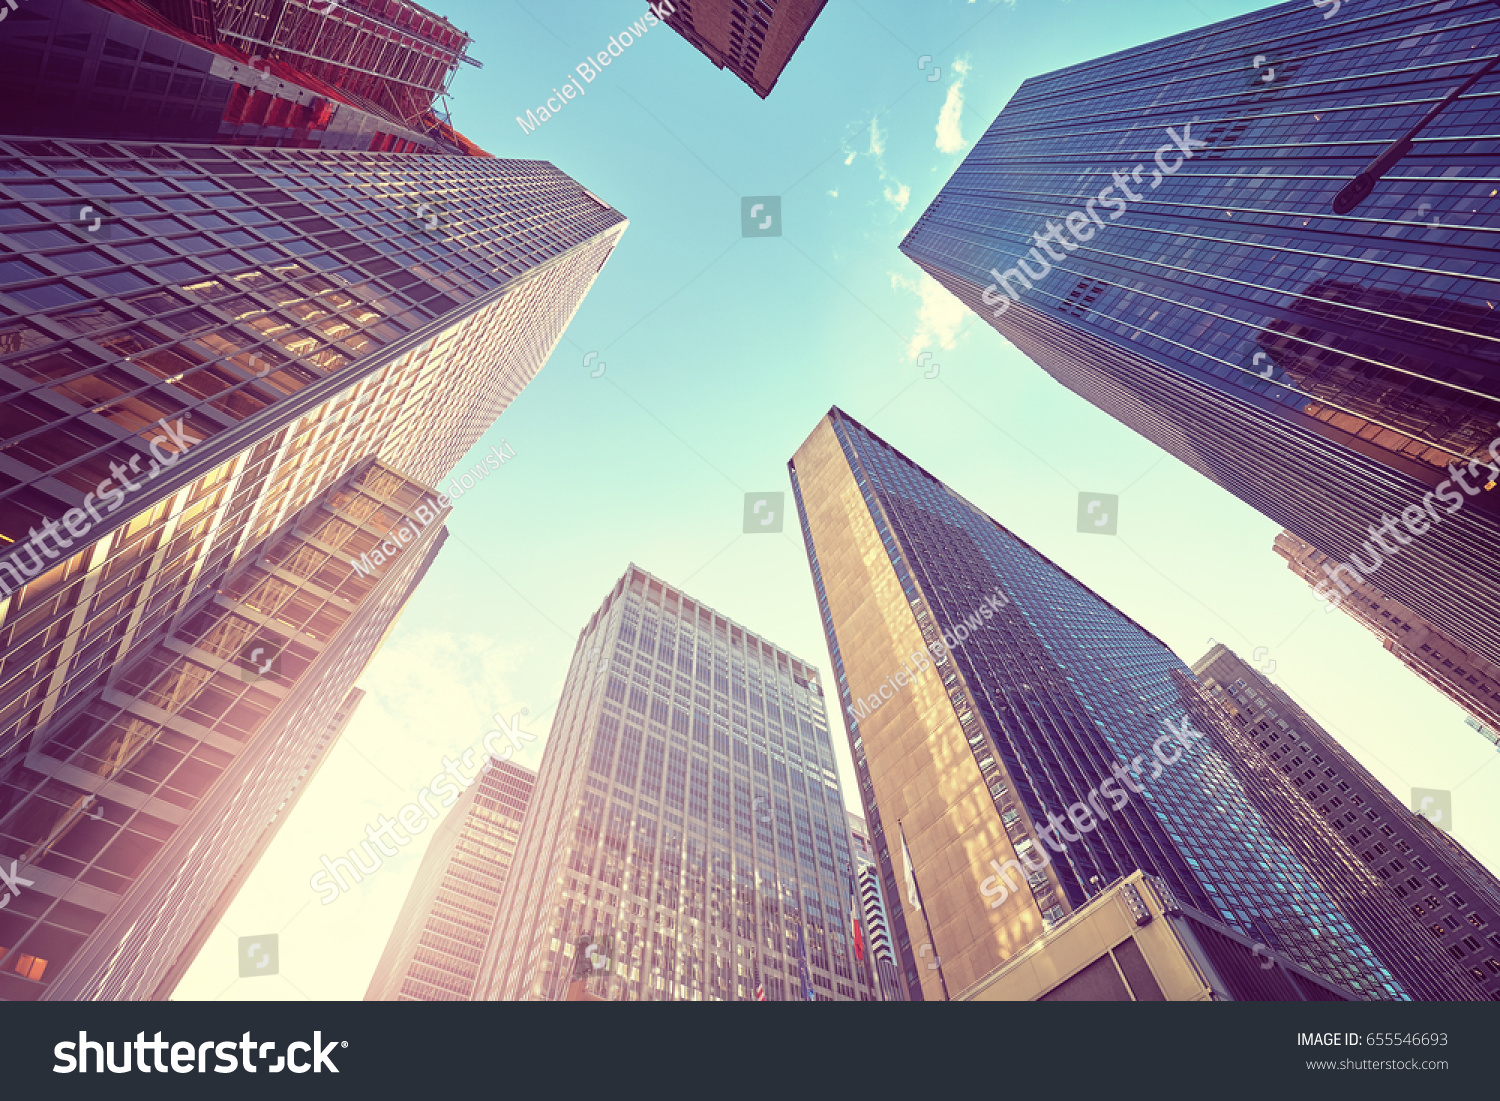 Vintage stylized photo of Manhattan skyscrapers at sunset, looking up perspective, New York City, USA.  #655546693